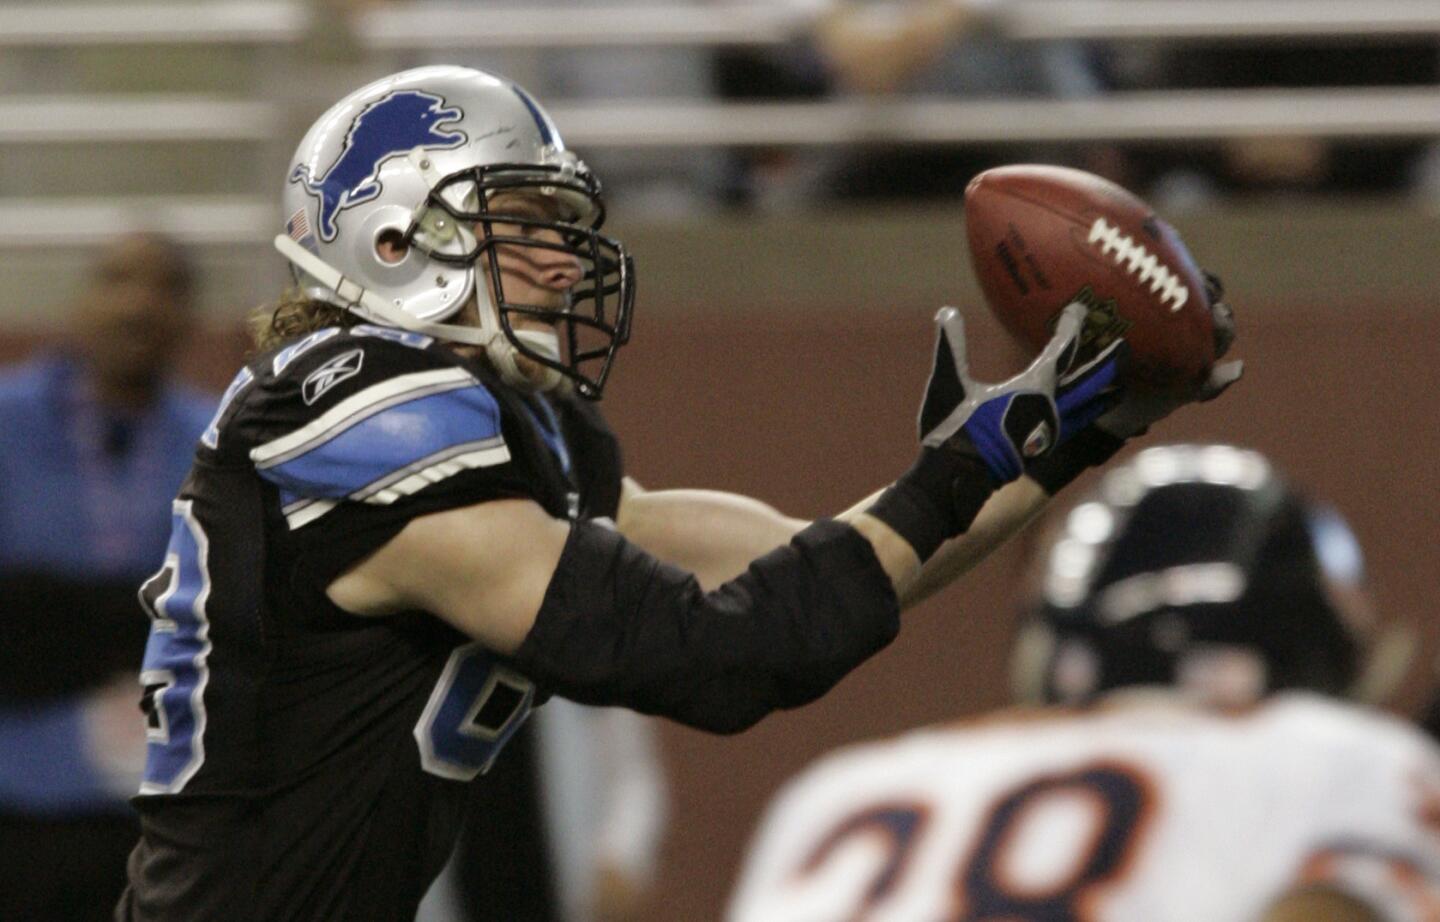 Detroit Lions tight end Dan Campbell, left,defended by Chicago Bears safety Danieal Manning, pulls in a 23-yard touchdown during the first quarter of their football game at Ford Field in Detroit, Sunday, Dec. 24, 2006. (AP Photo/Carlos Osorio)